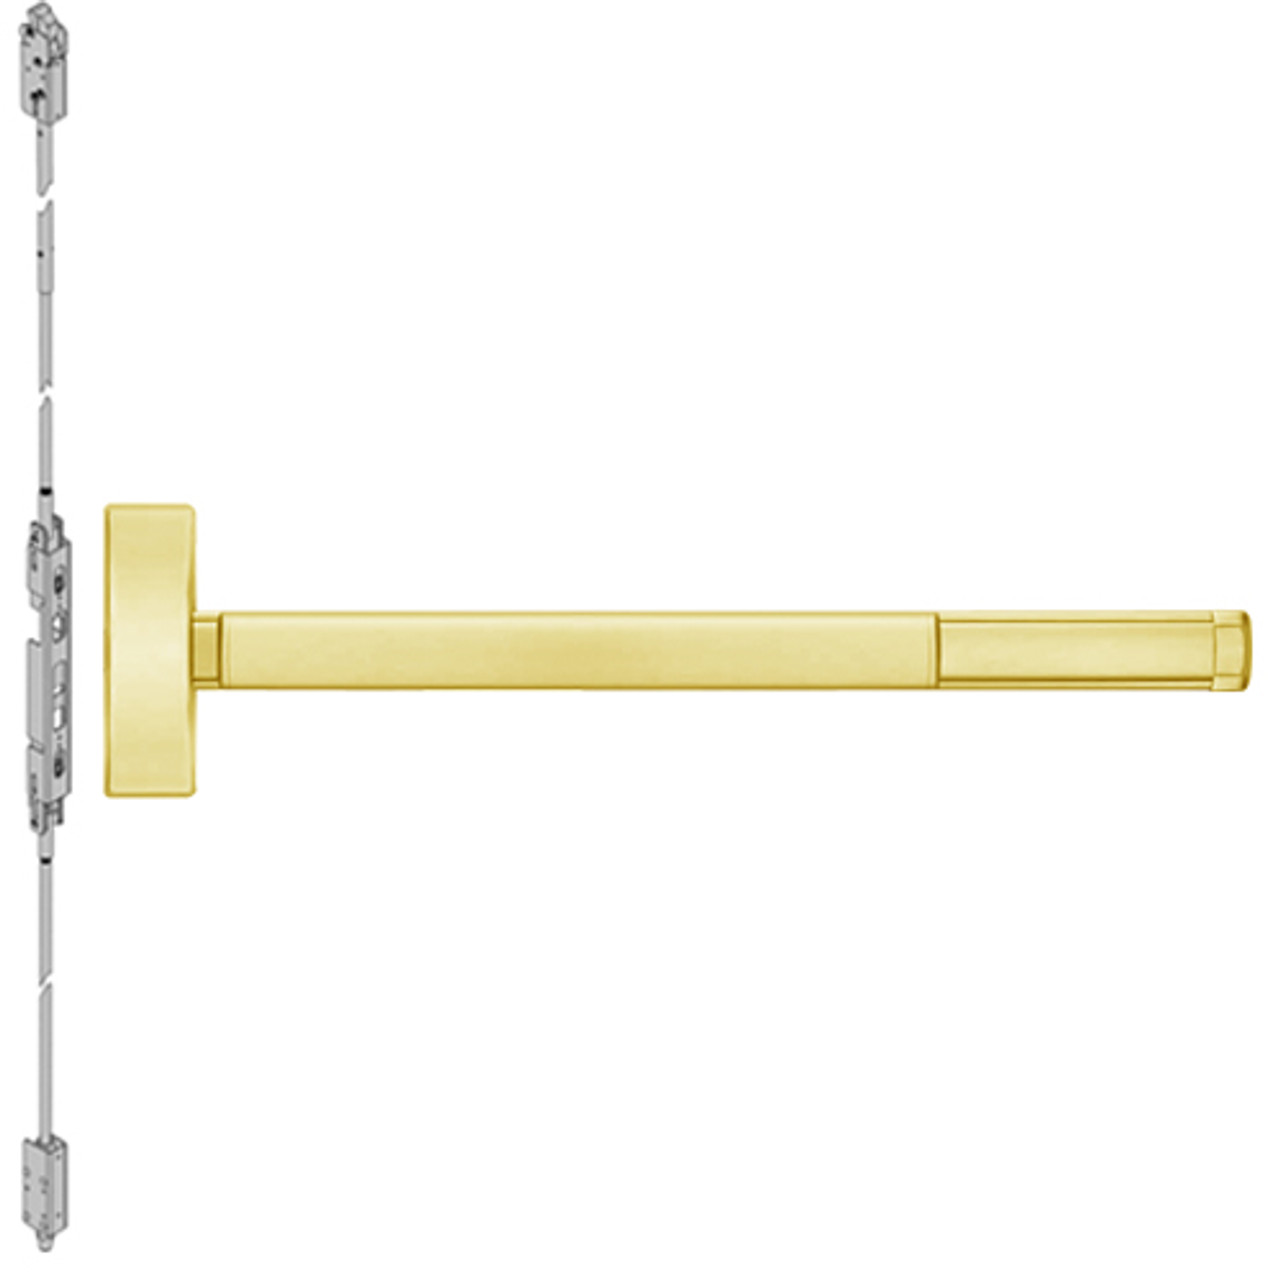 TSFL2815LBR-605-48 PHI 2800 Series Fire Rated Concealed Vertical Rod Exit Device with Touchbar Monitoring Switch Prepped for Thumbpiece Always Active in Bright Brass Finish